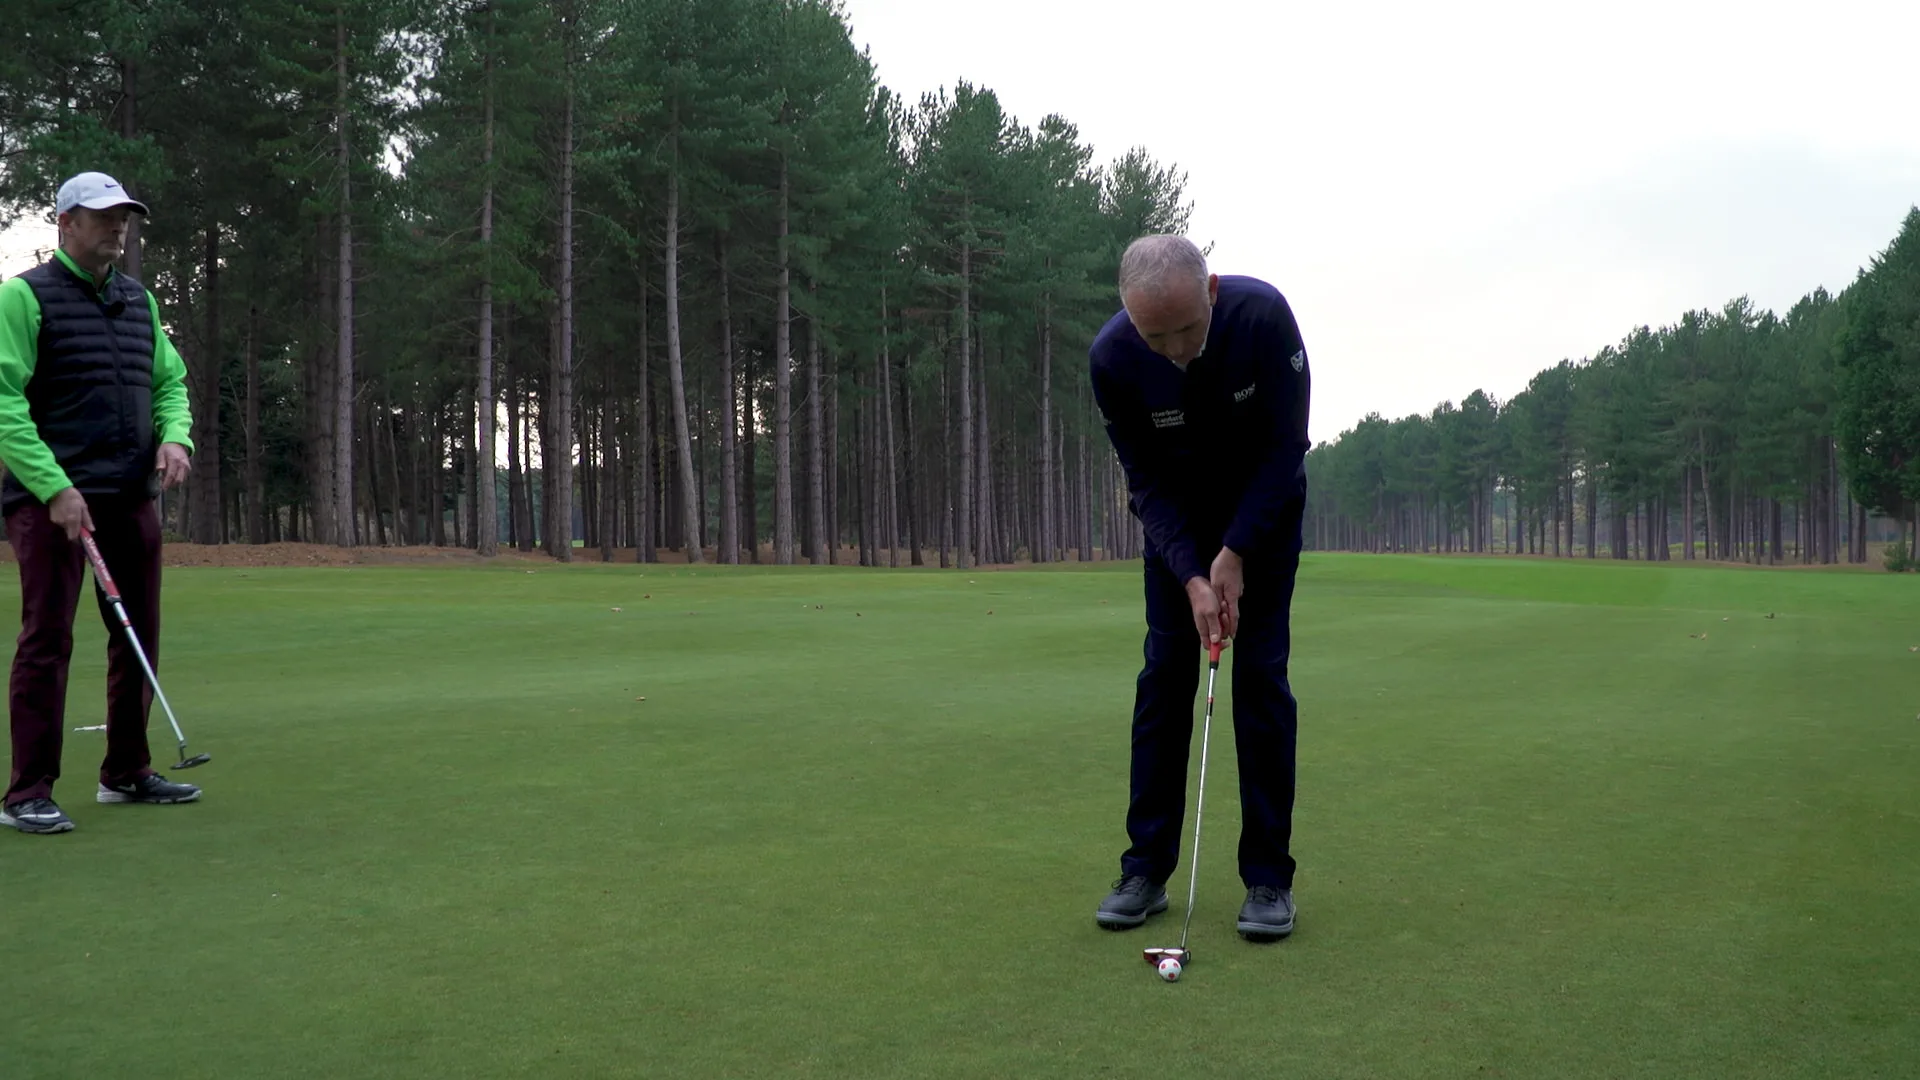 Improve your putting: What does this ball need to do to go in the hole?